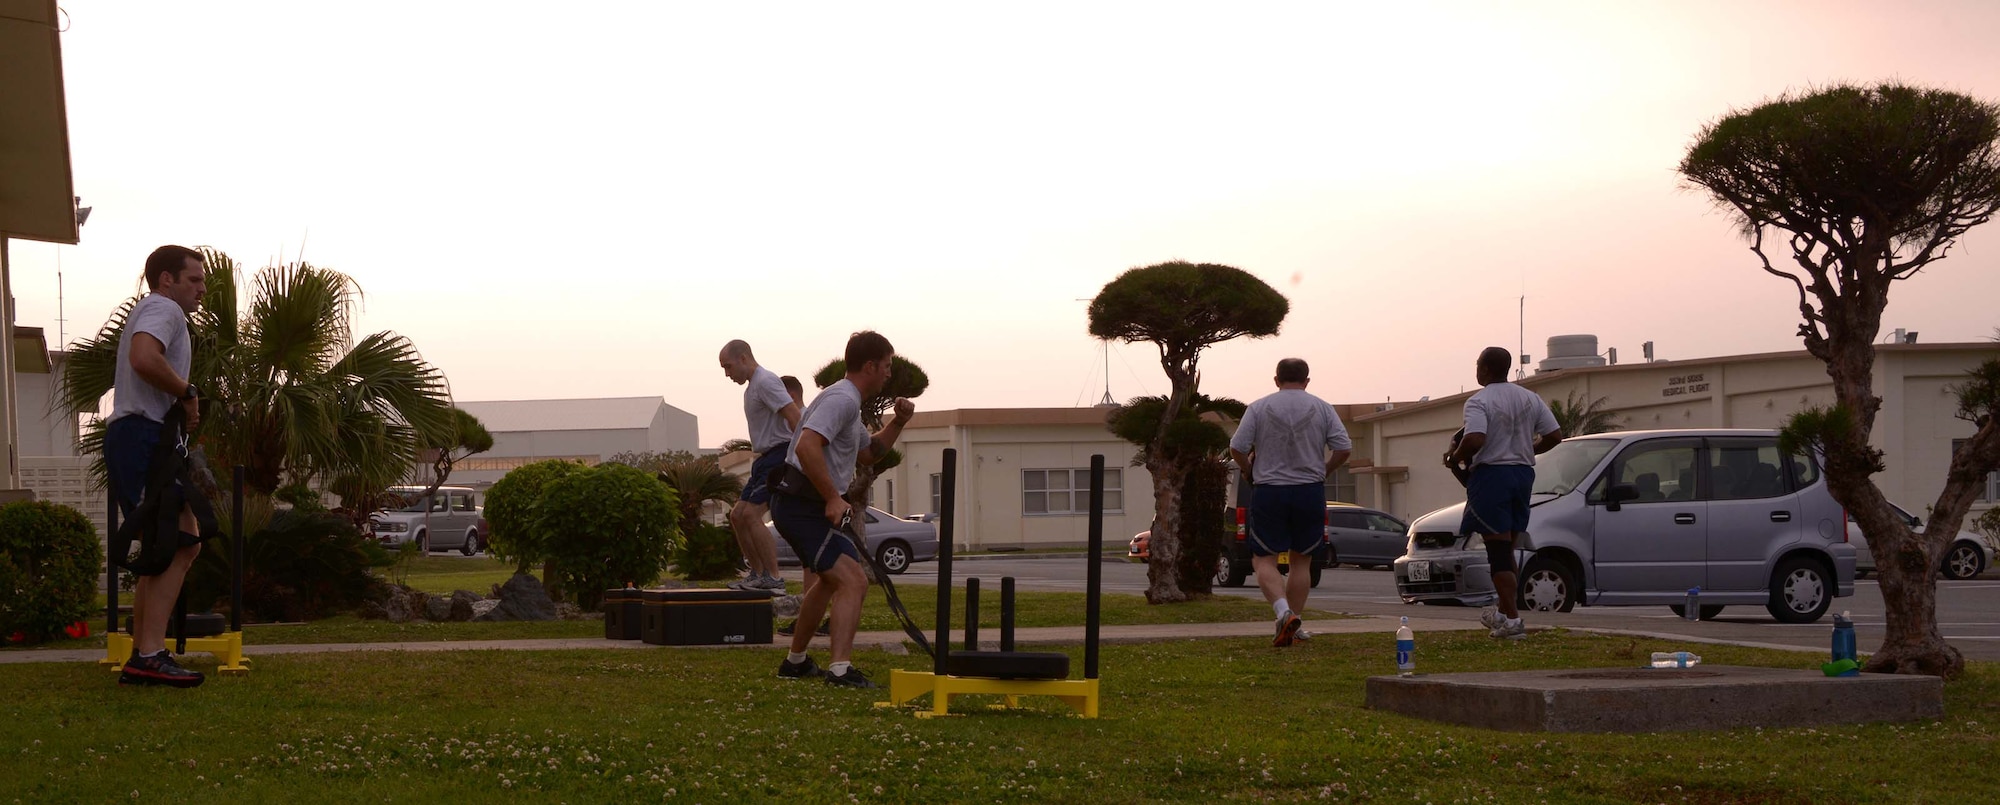 Members of the 320th Special Tactics Squadron, works out in front of the Human Performance Training Center, during squadron physical training March 22 at Kadena Air Base, Japan. The HPTC houses the human performance program, which focuses on not only strengthening the battlefield Airman physically, but also rehabilitating the individual ensuring the Air Force’s human weapons system is performing to its maximum potential for as long as possible.(U.S. Air Force photo by Tech. Sgt. Kristine Dreyer)